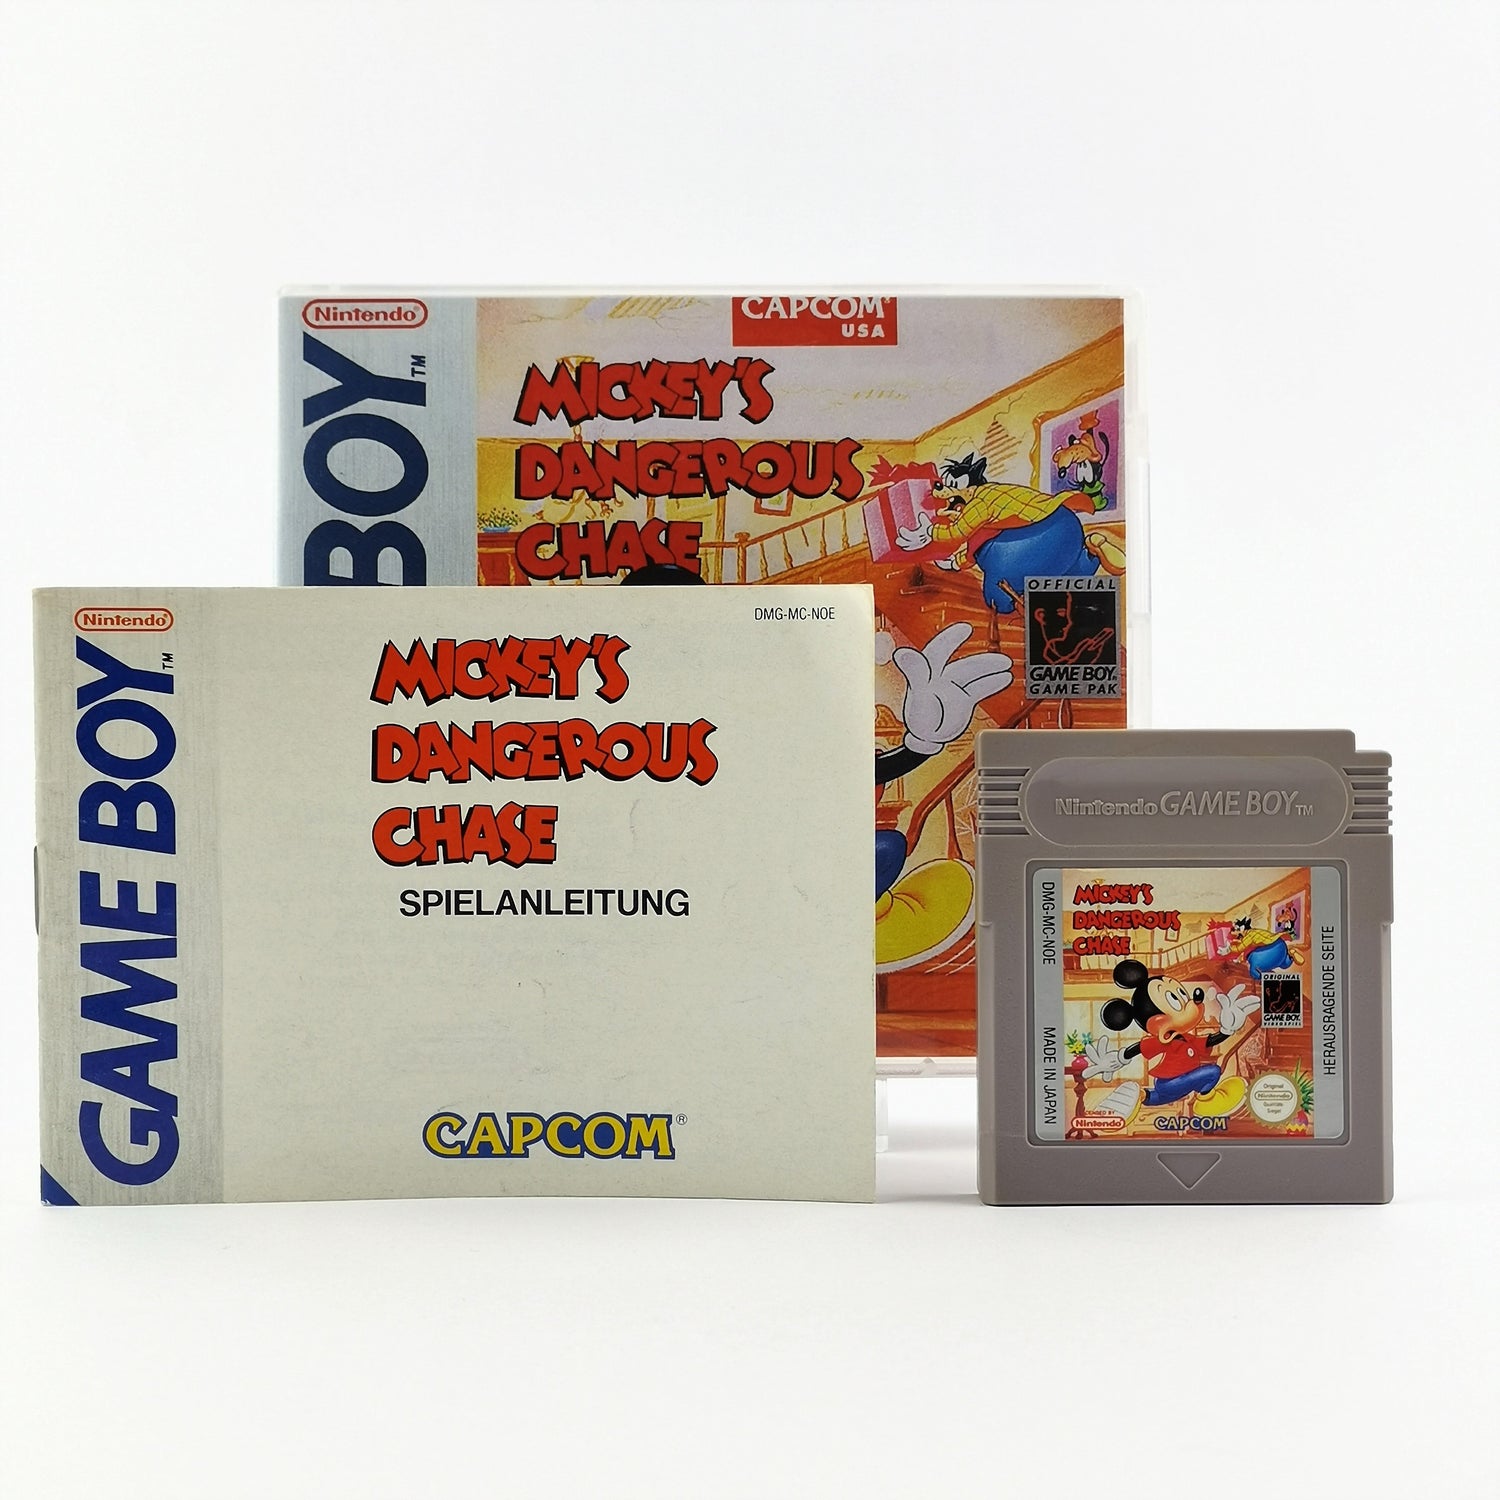 Nintendo Game Boy Classic Game: Mickey's Dangerous Chase - Module + Instructions GB